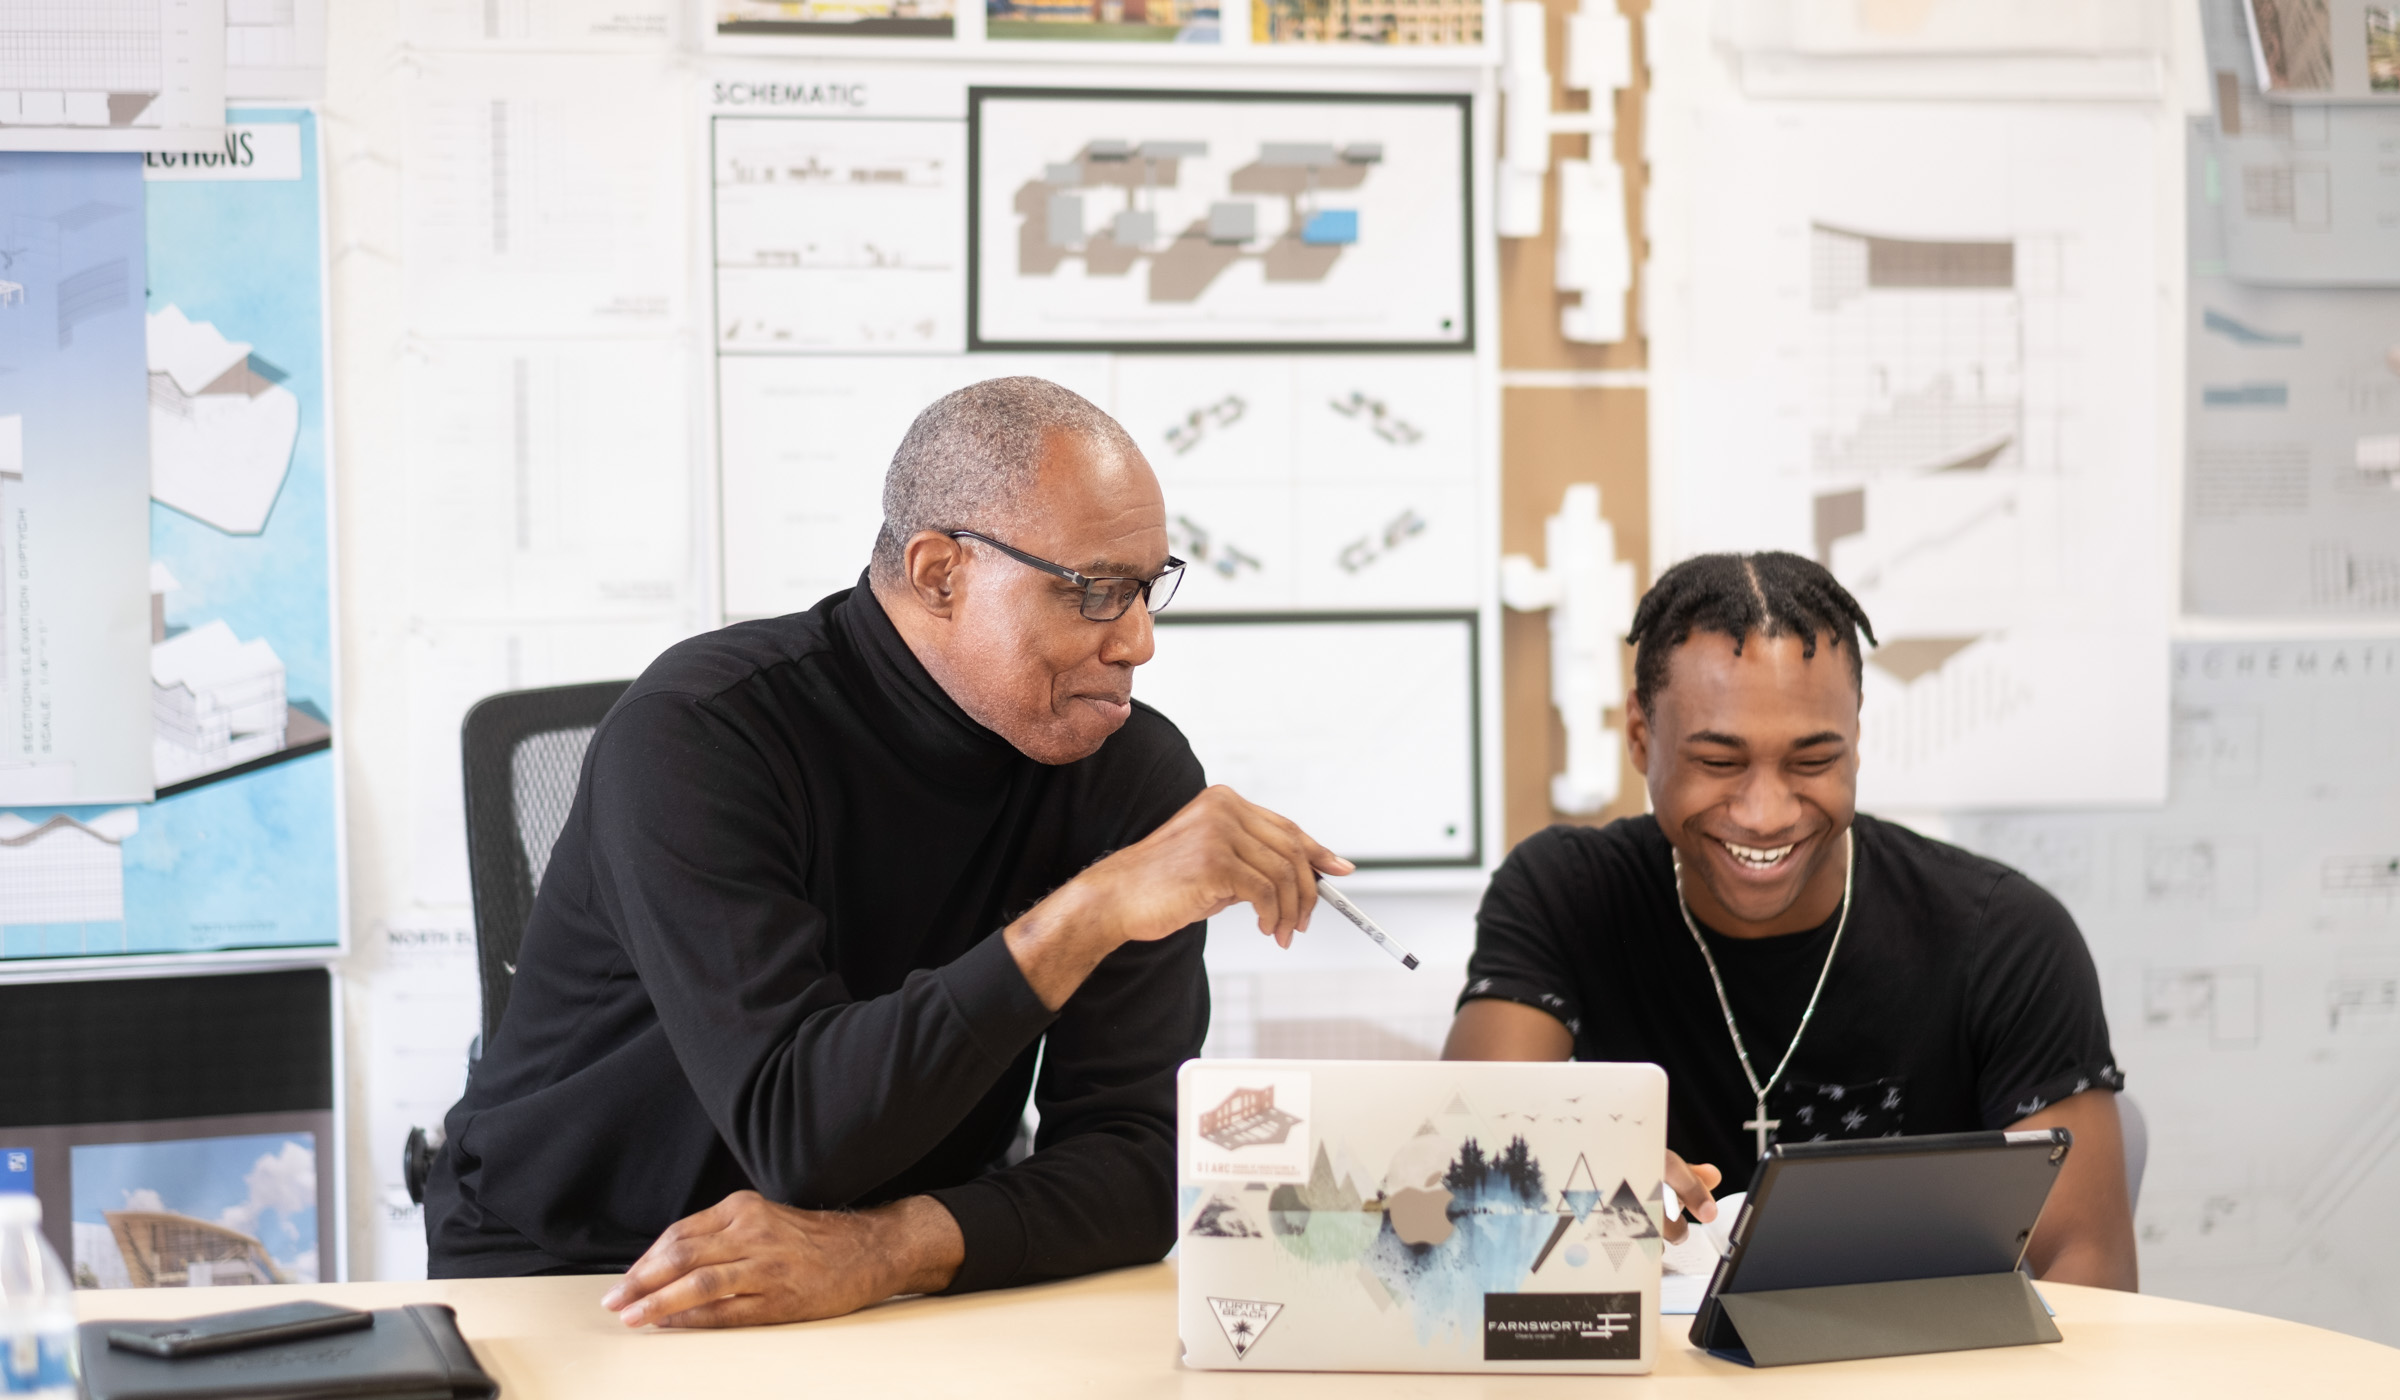 With architectural drawings on the wall behind them, Professor Hunter (L) points with a pen at student Alston Brown&#039;s computer screen.